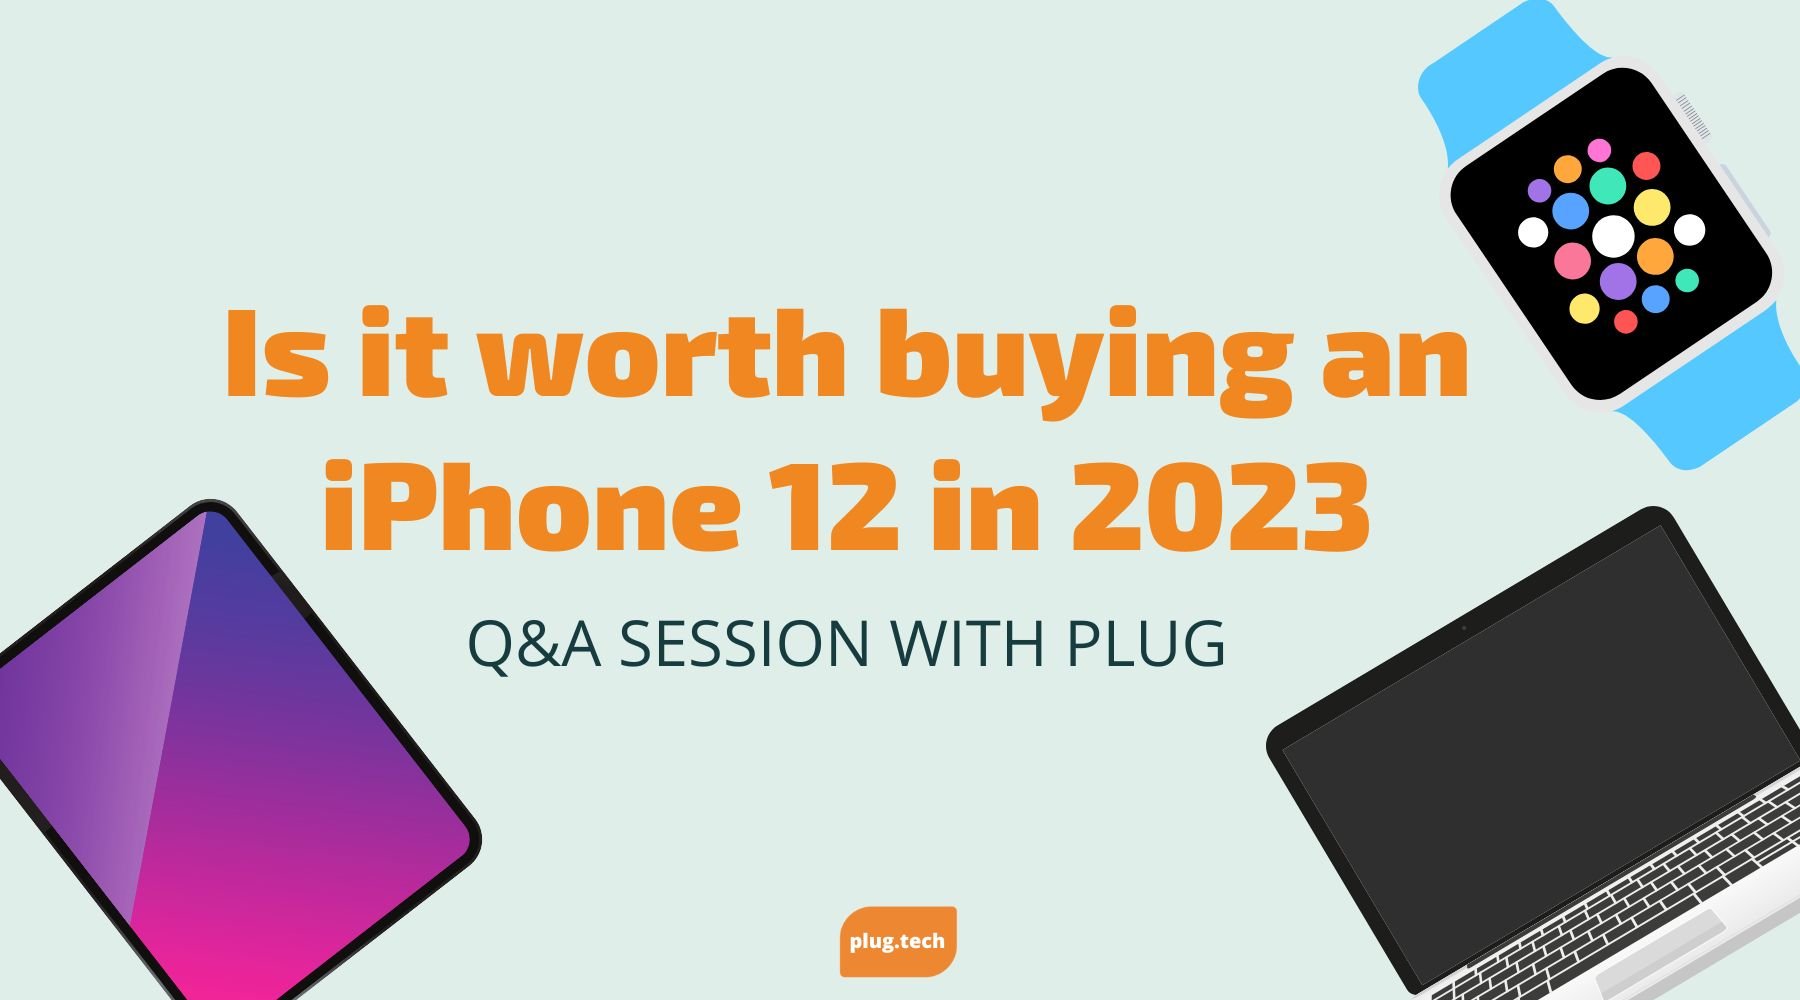 Is it worth buying an iPhone 12 in 2023?